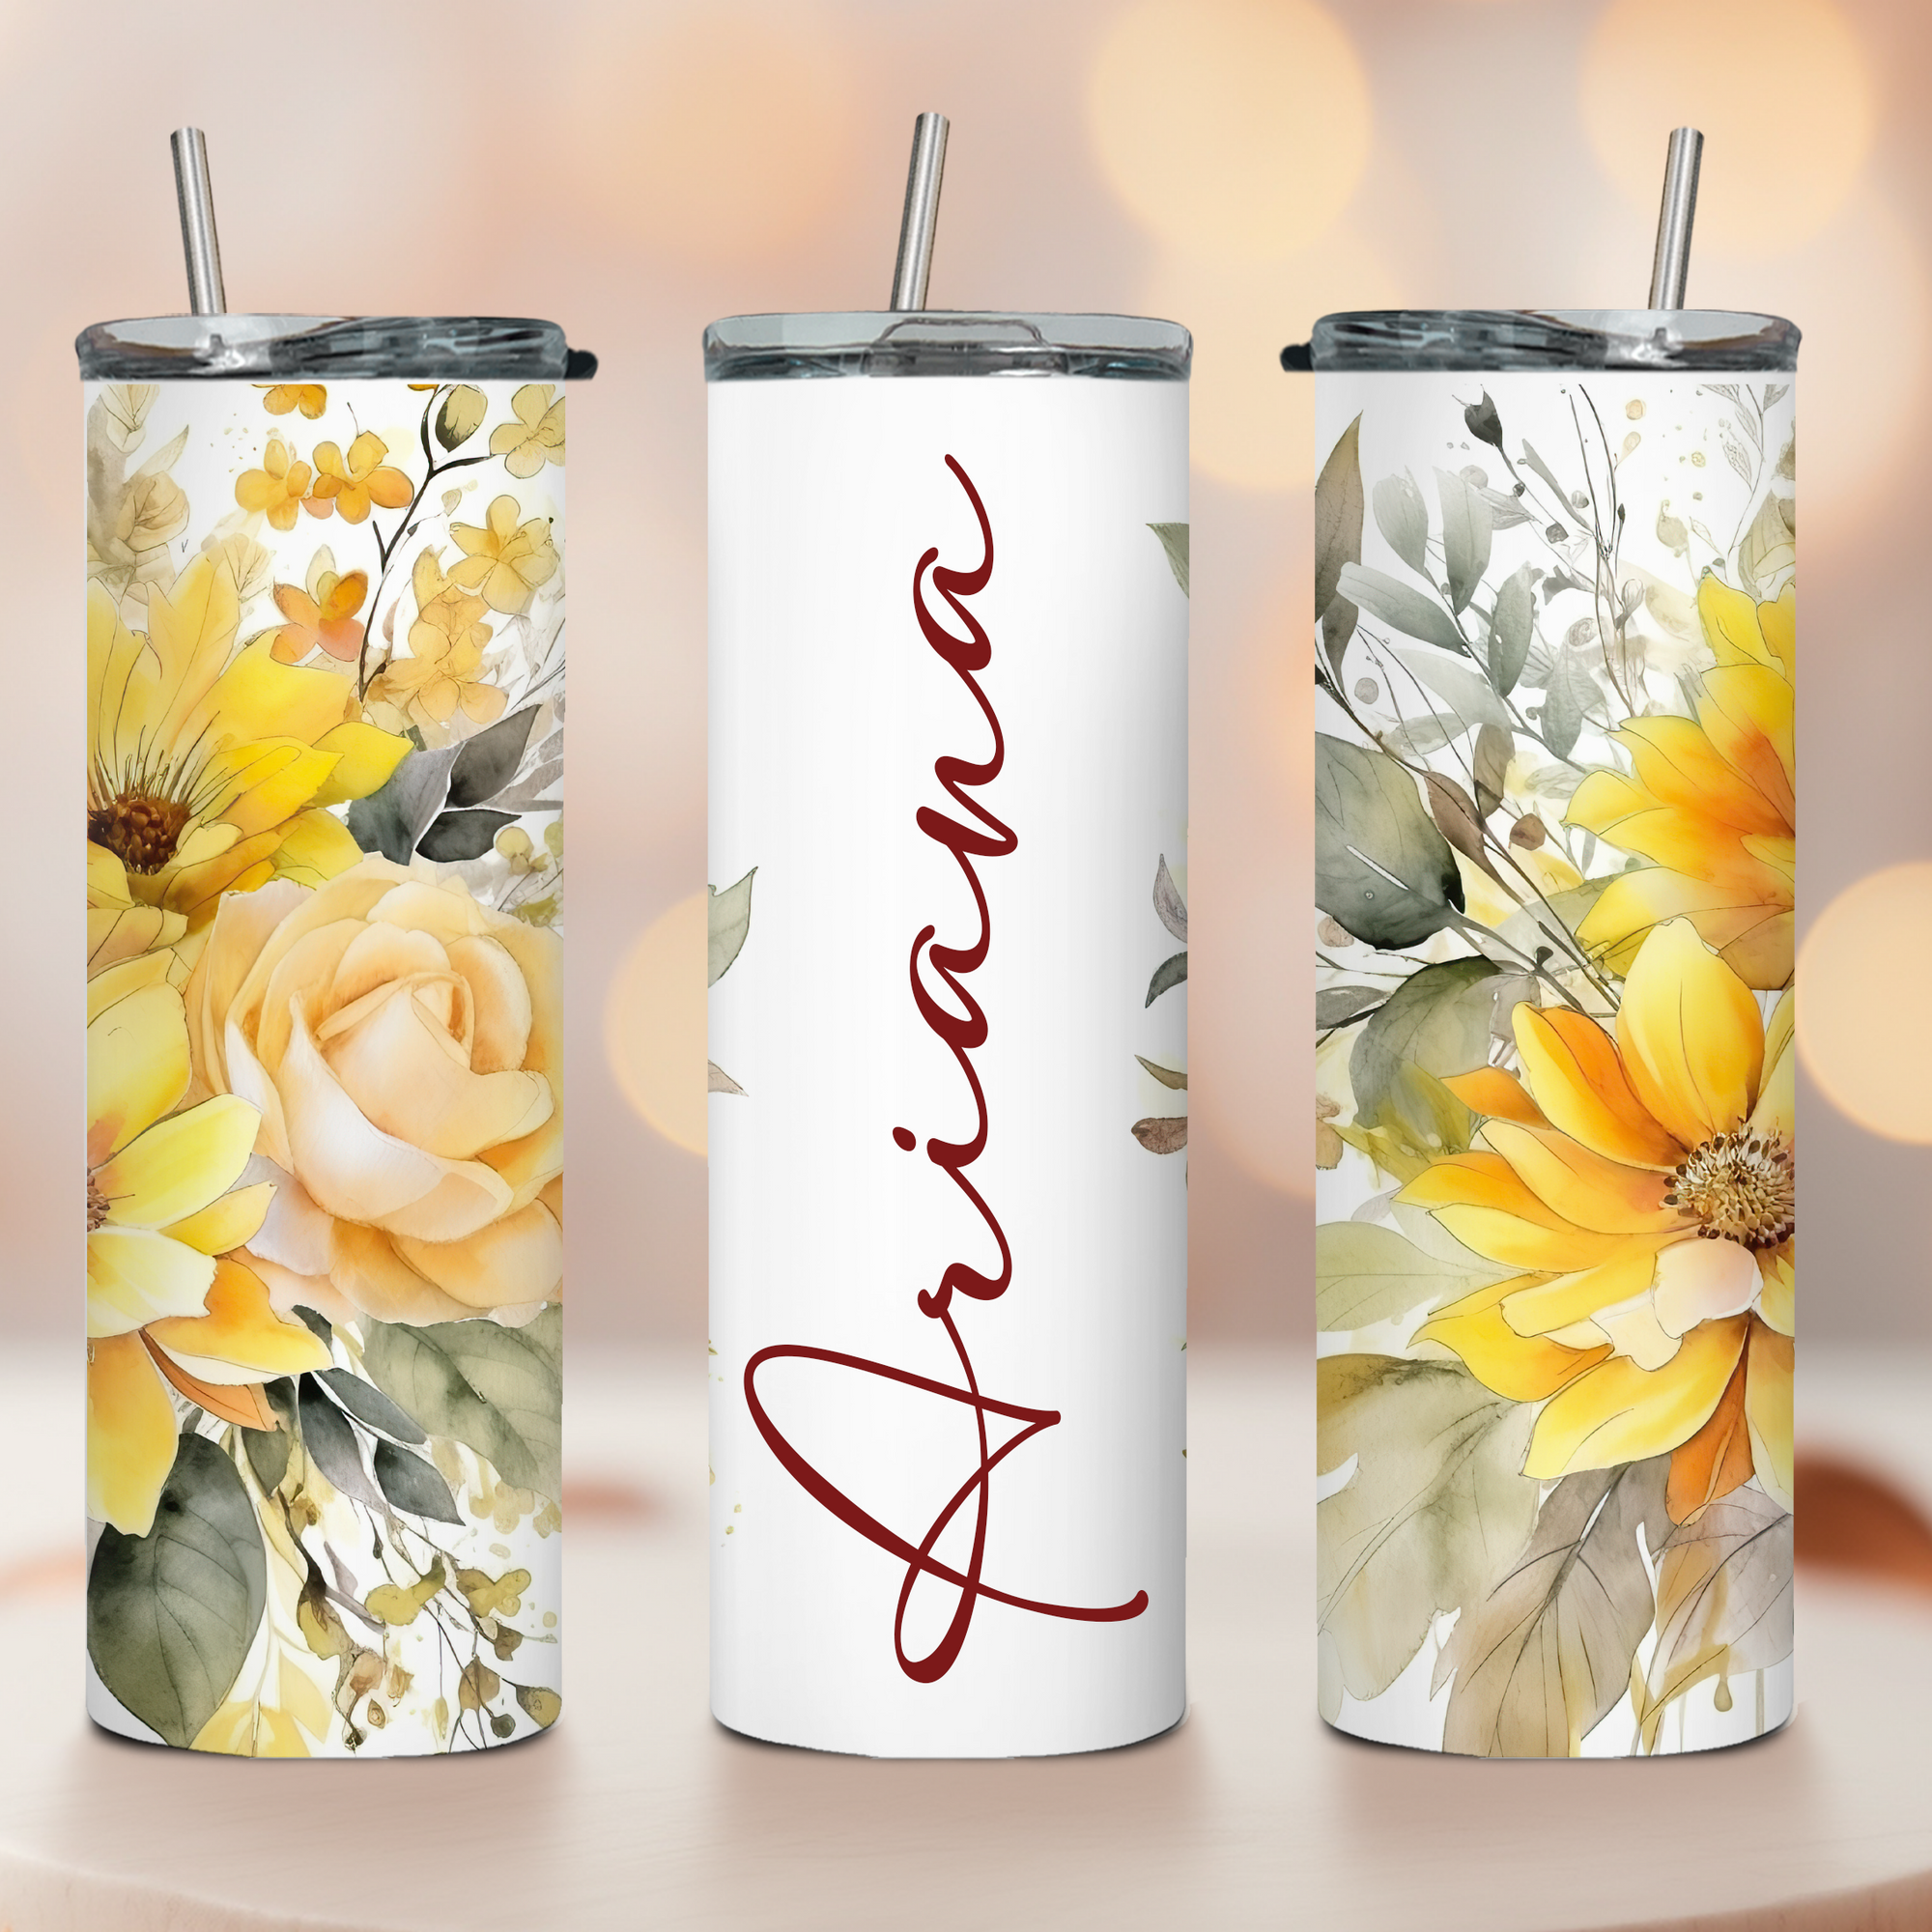 Lily's Atelier Bridesmaid Gifts Set of 5, Personalized Bridesmaid Tumbler  W/Name and Title - 8 Vivid…See more Lily's Atelier Bridesmaid Gifts Set of